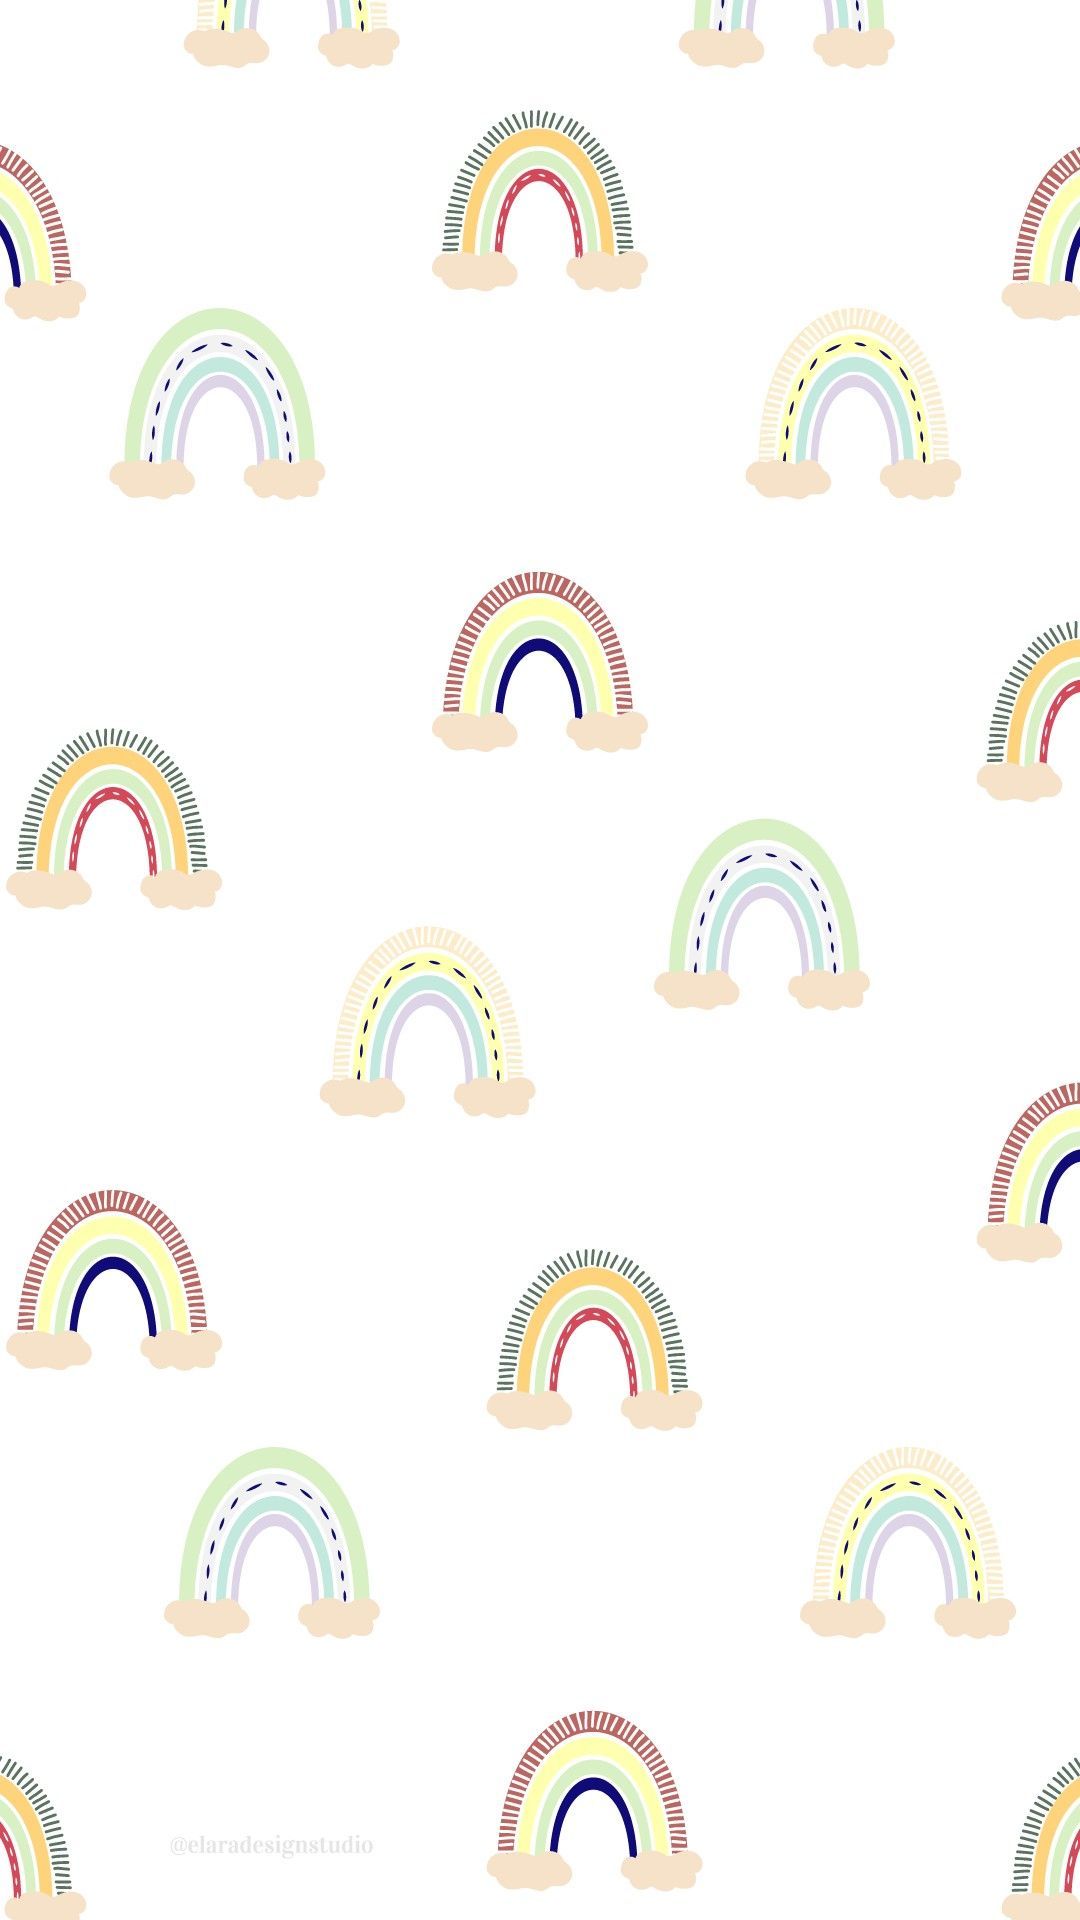 A free phone wallpaper for you all! I hope you like it as much as I do! - Rainbows